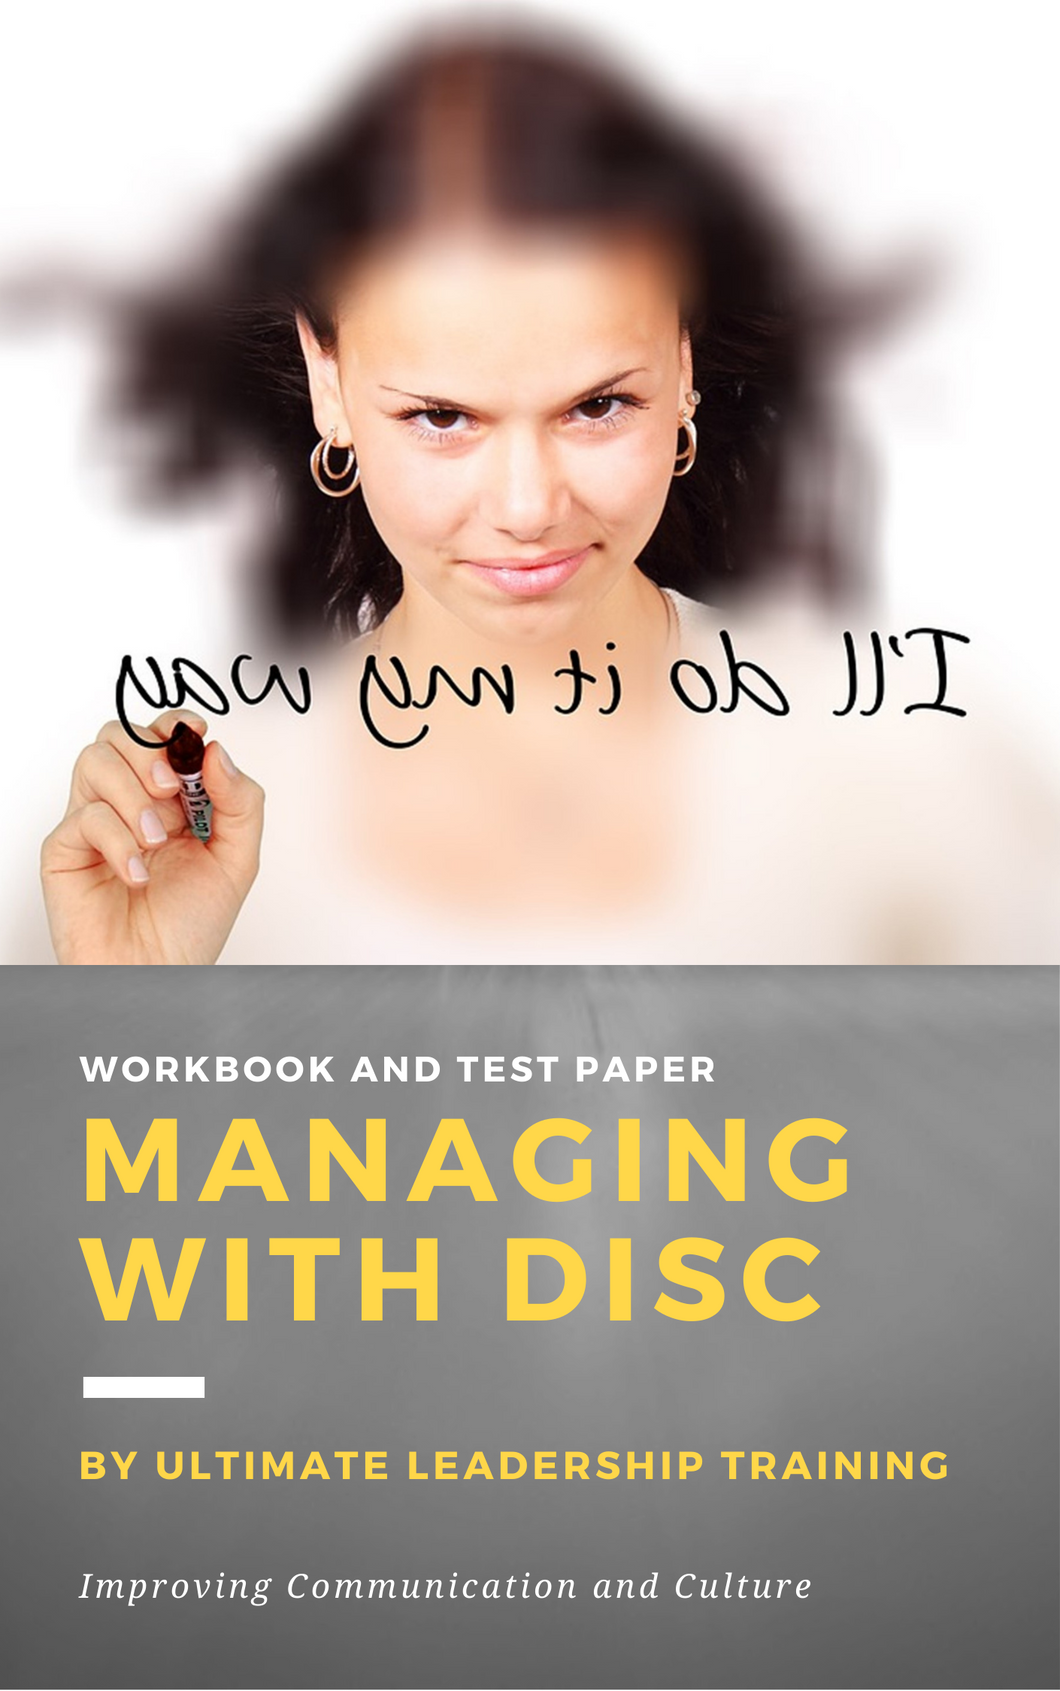 Managing DISC training workbook and training activity for use during in person or virtual training courses and team building activities